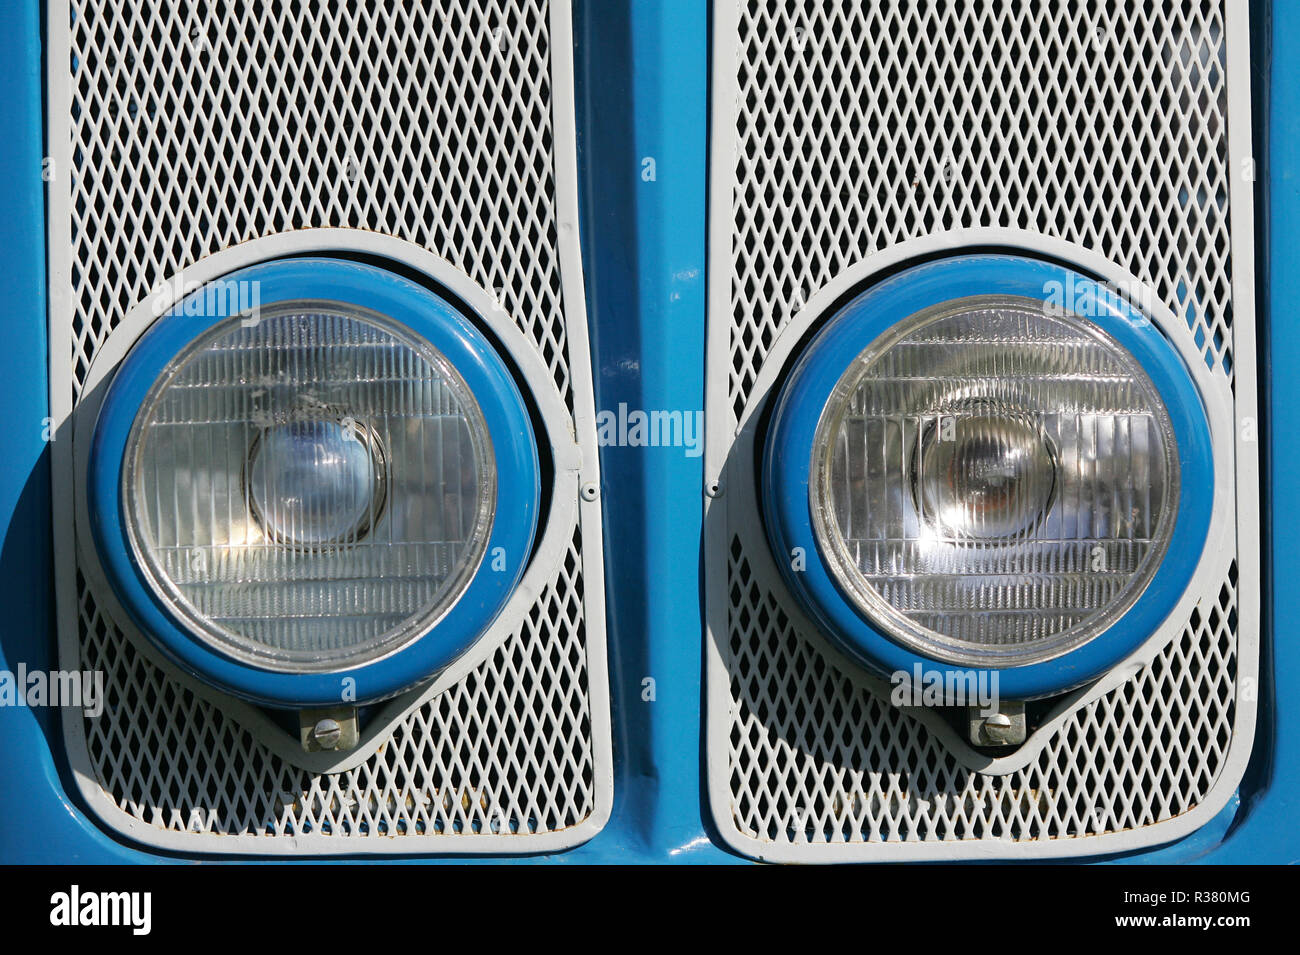 Headlights of an old Super Dexta tractor on display at a country fair. England UK GB Stock Photo